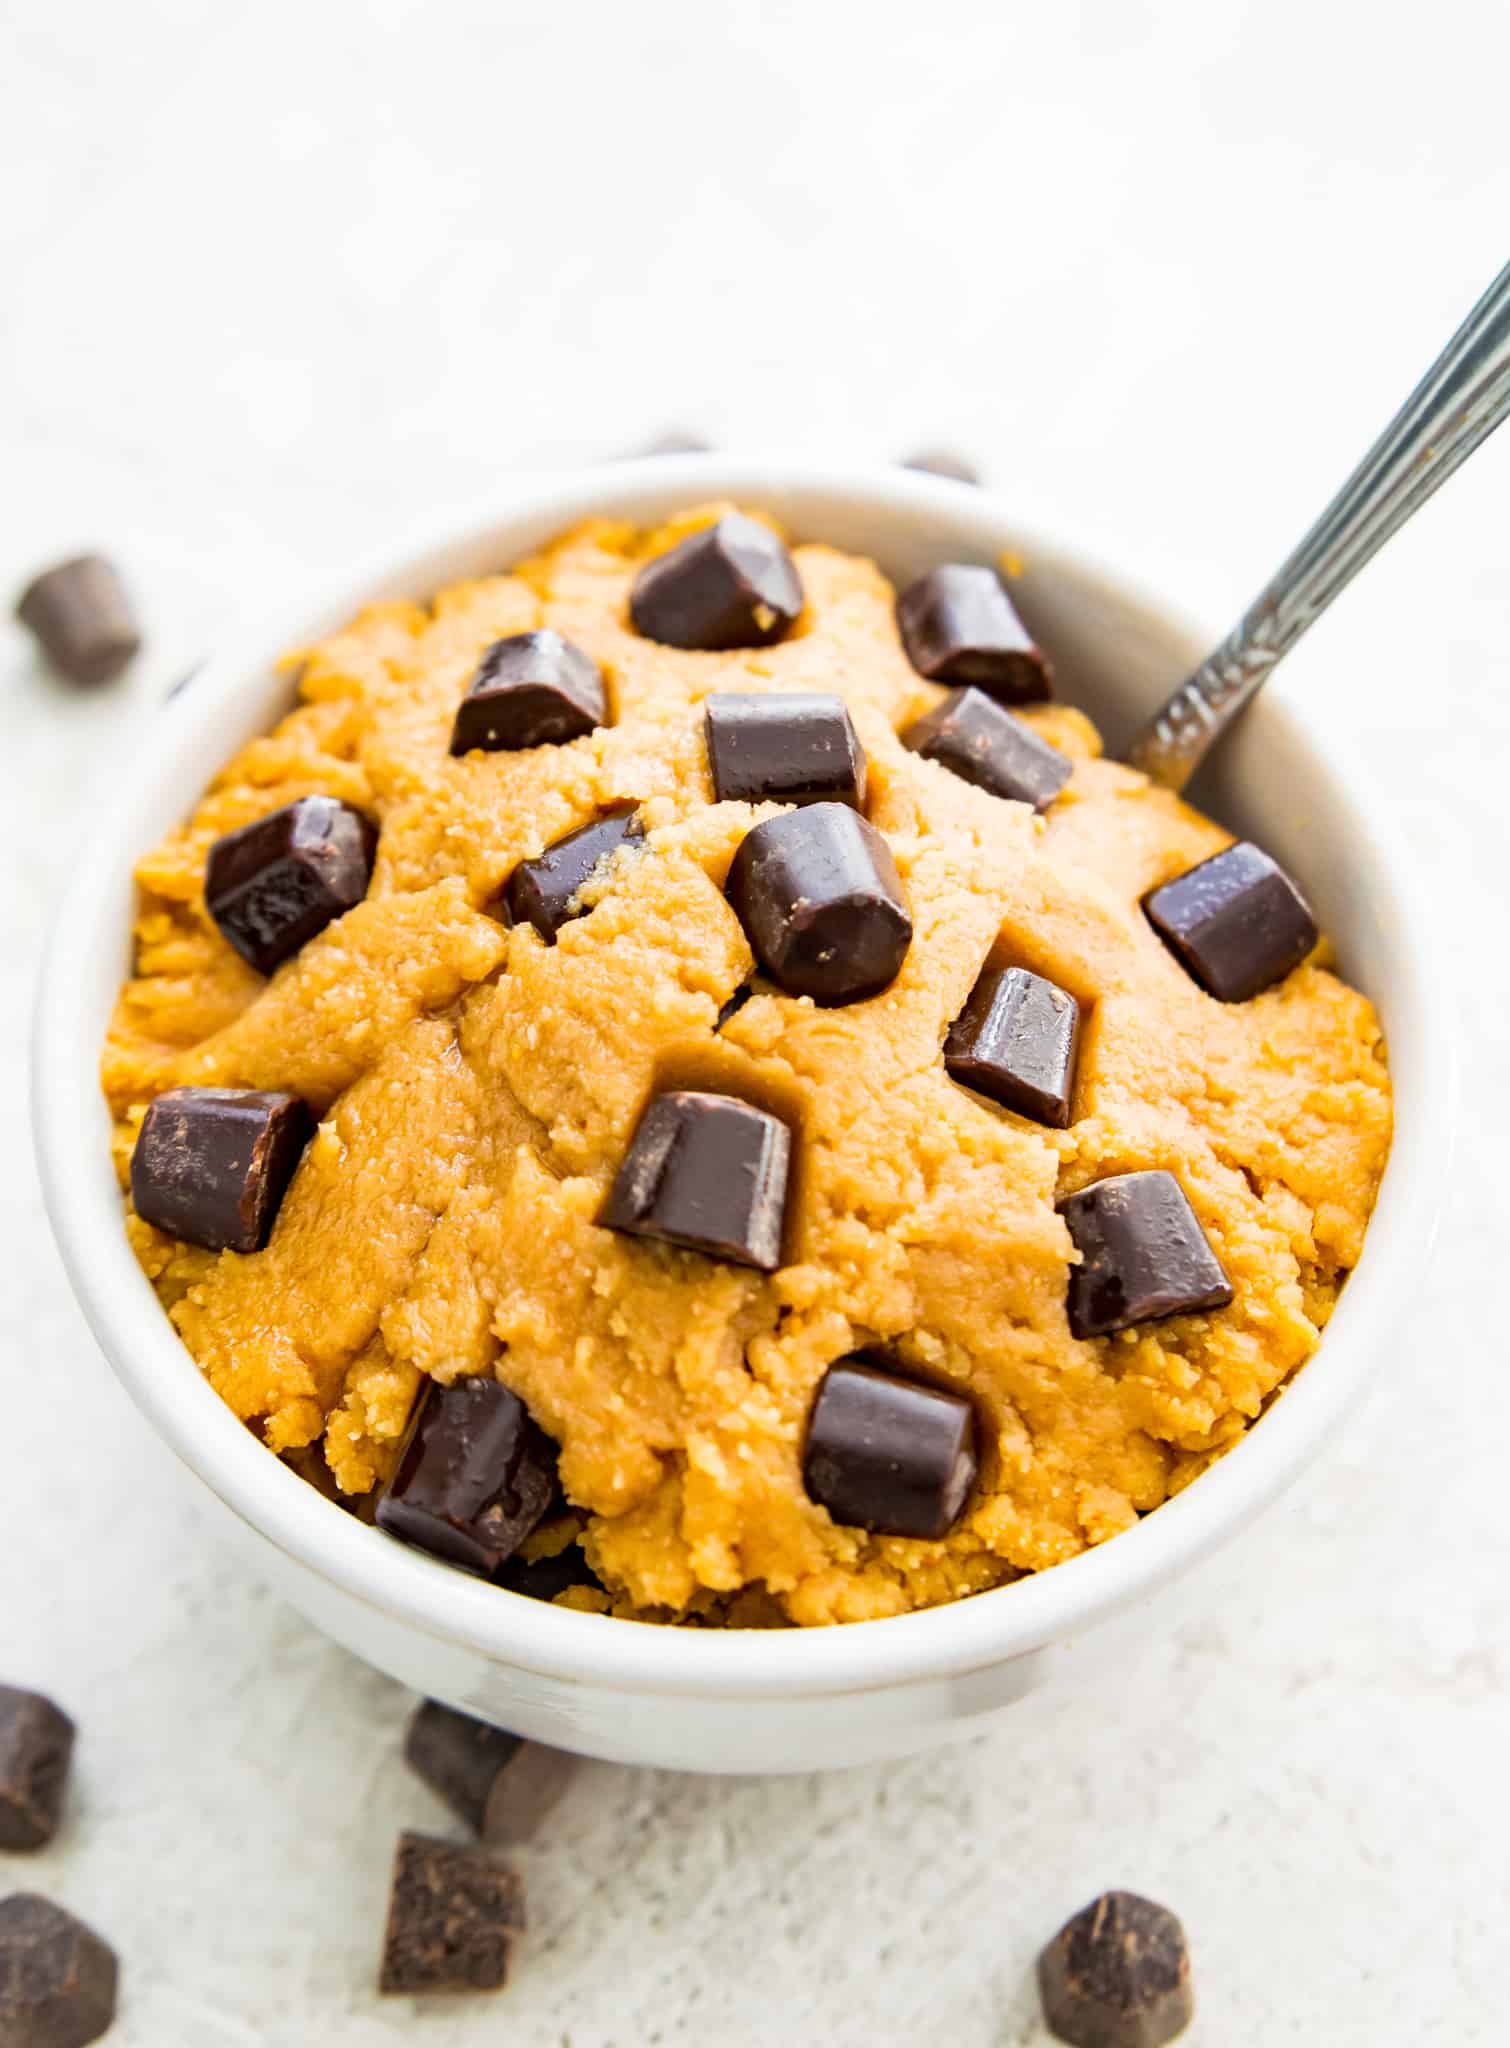 A bowl of protein powder cookie dough with chocolate chips on top.